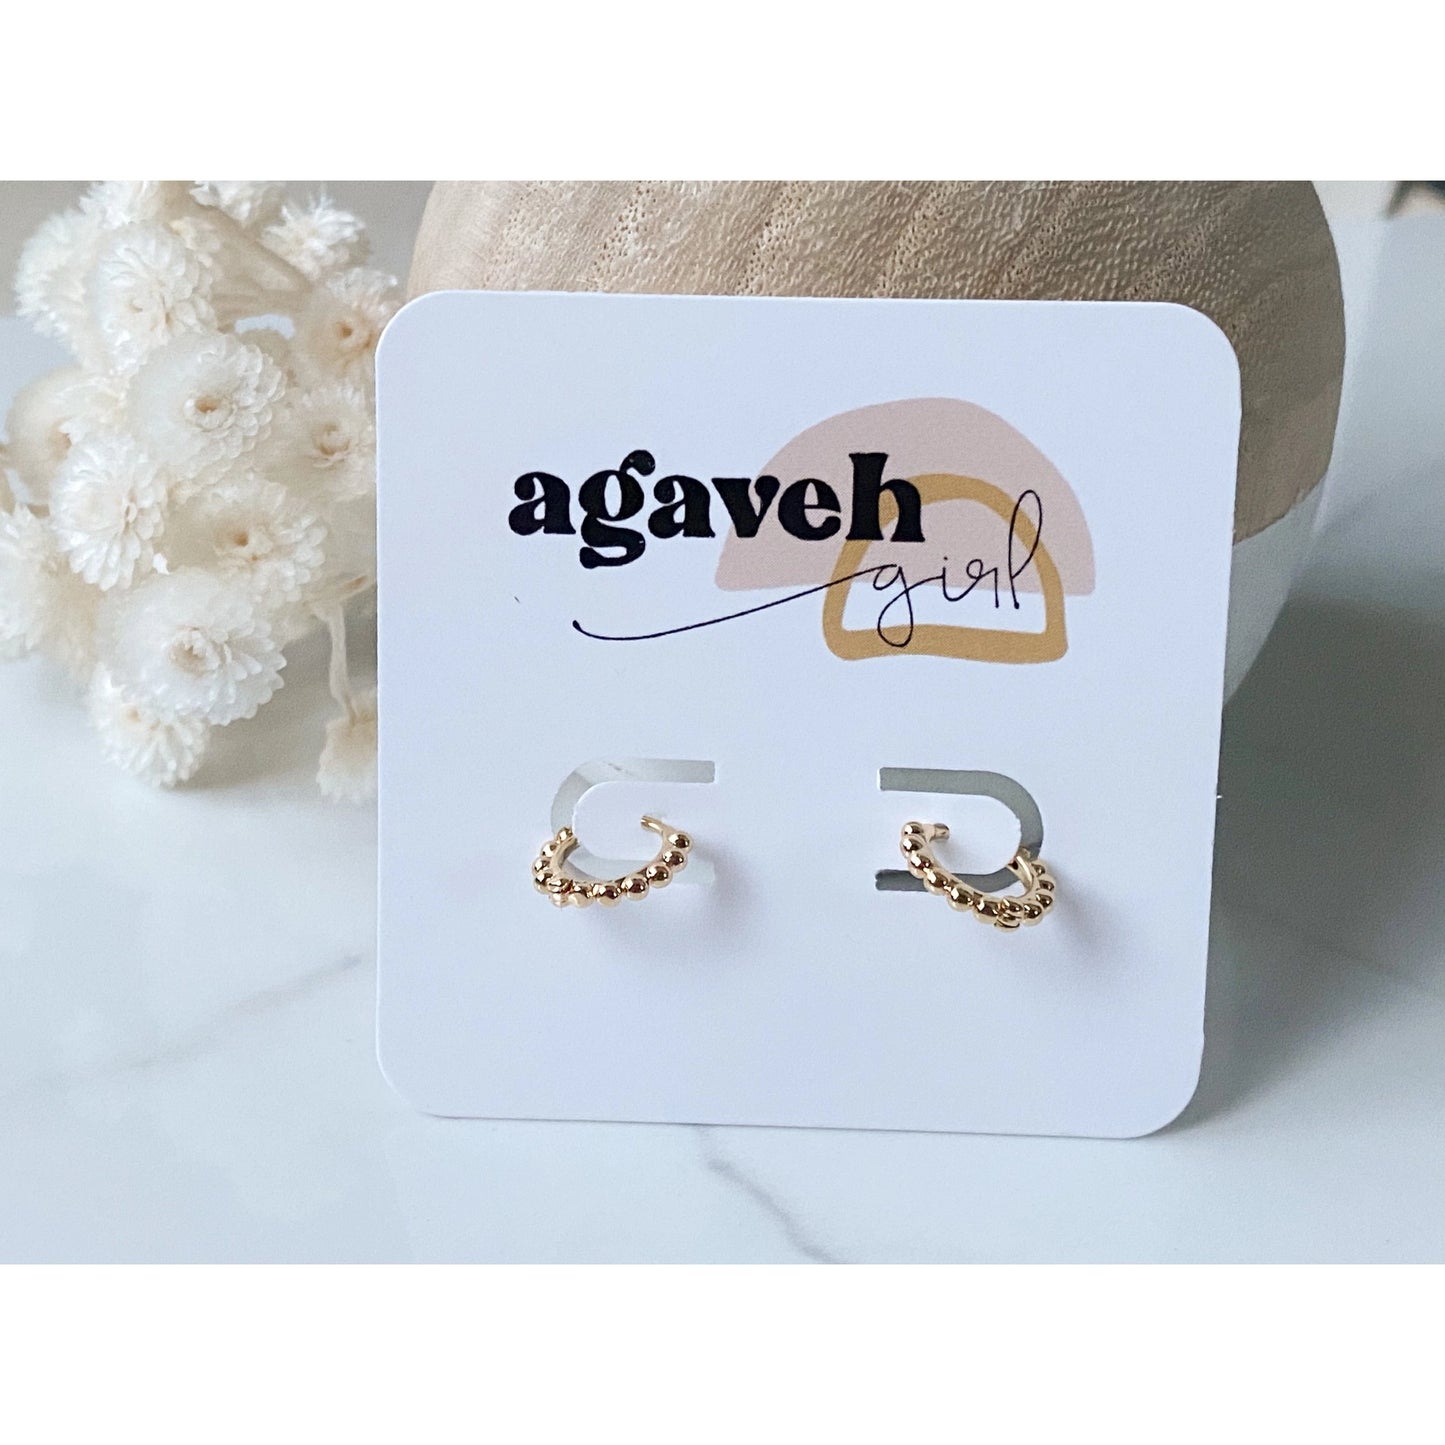 Agaveh Girl - Gold Collection